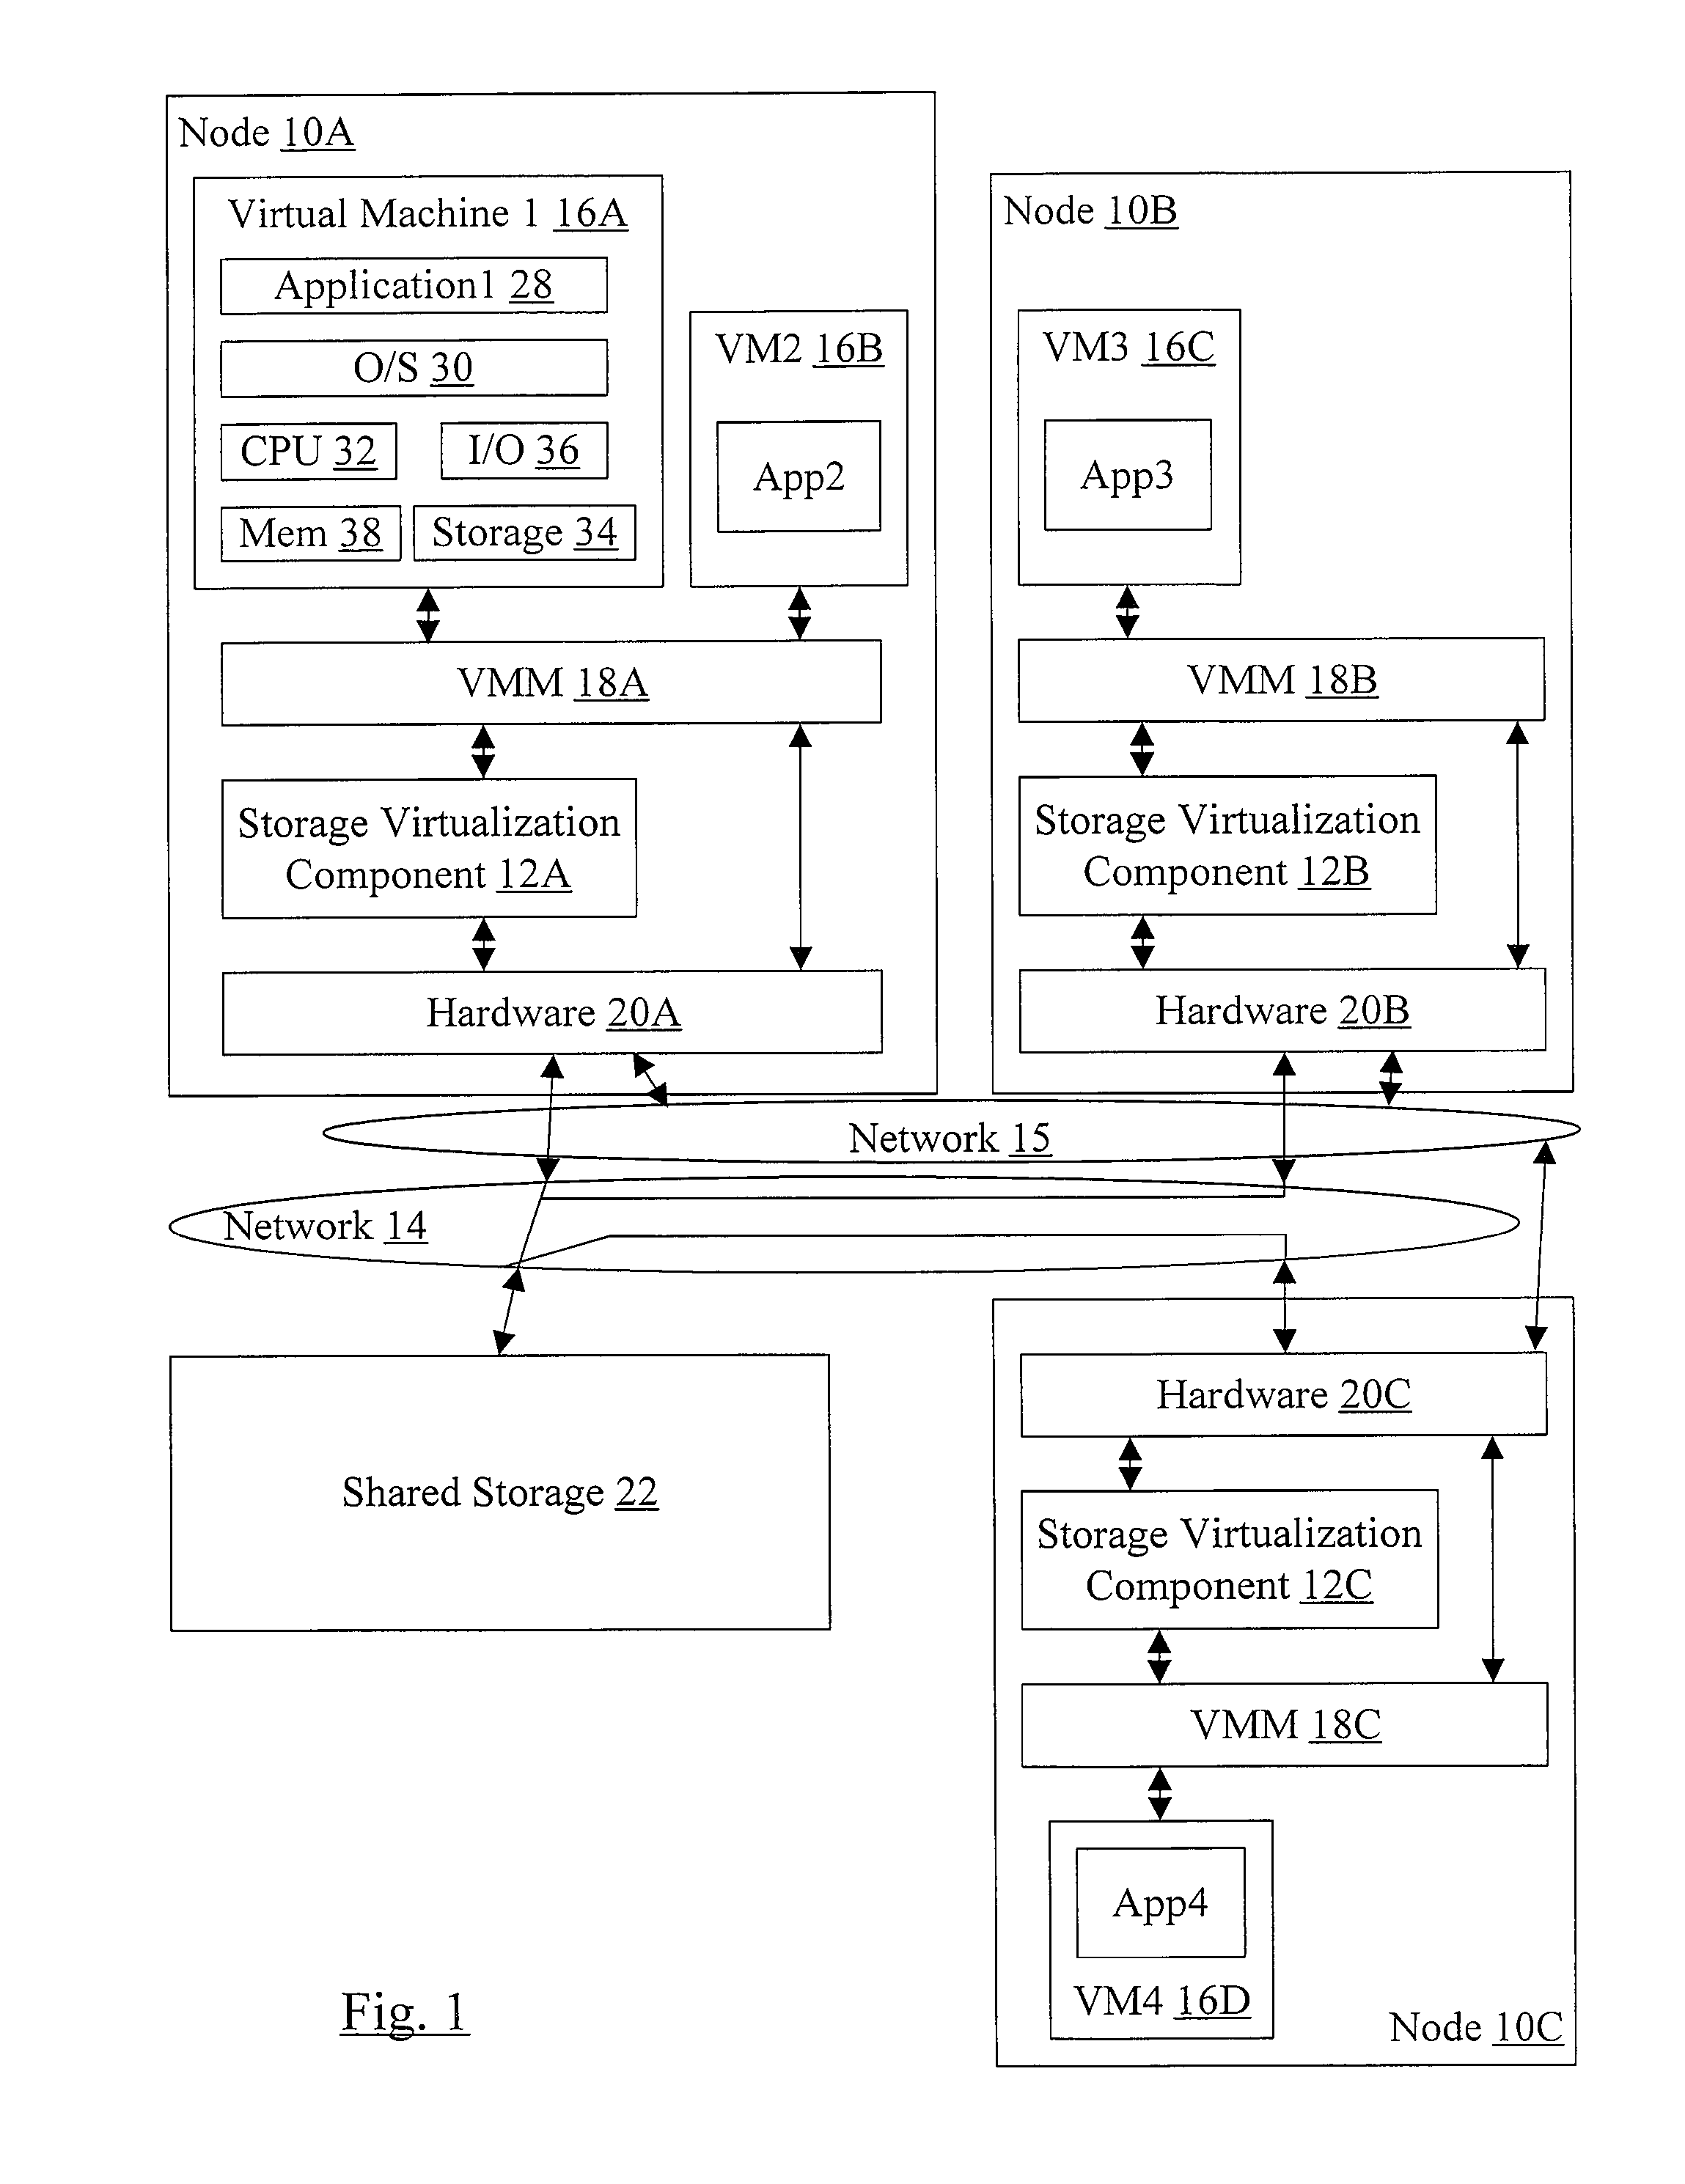 Providing fault tolerant storage system to a cluster